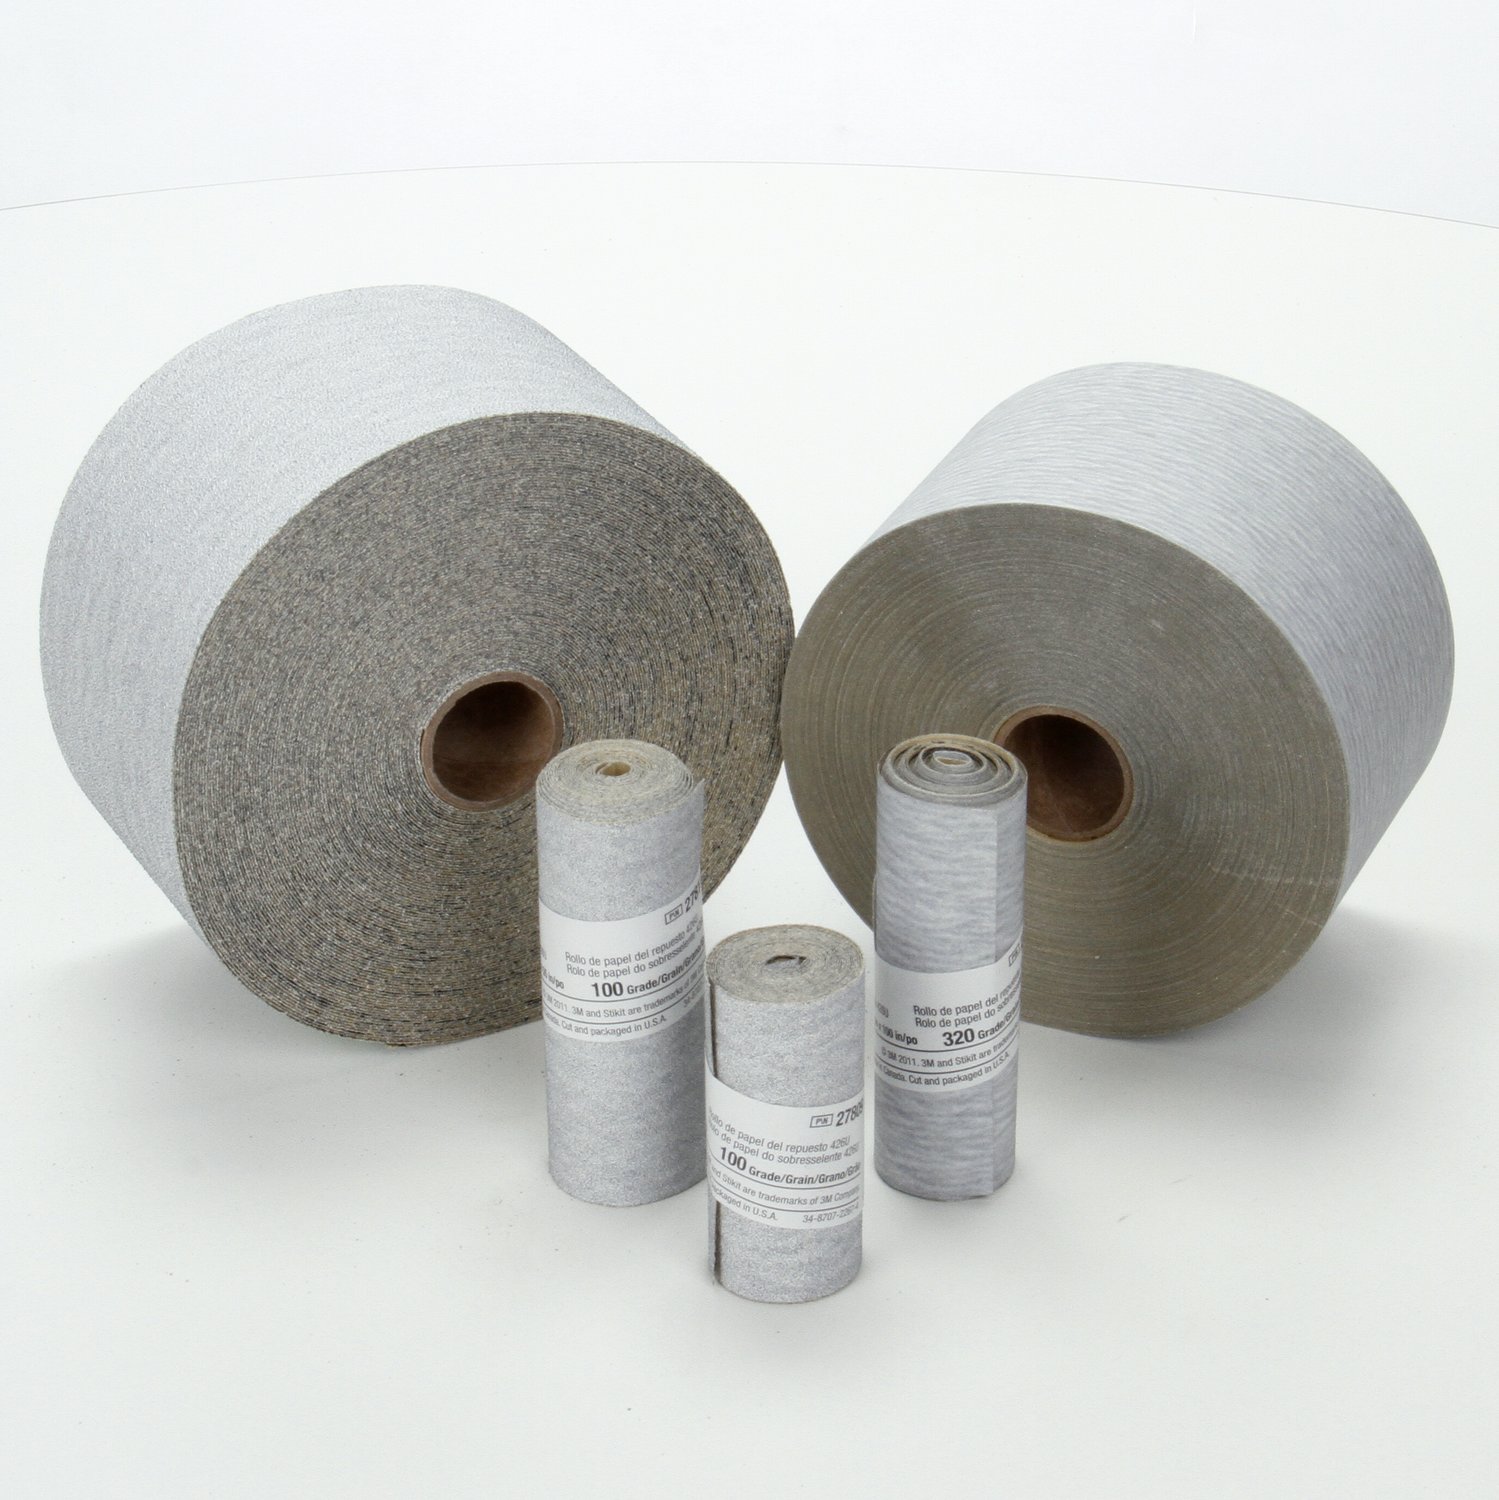 7100070172 - 3M Stikit Paper Roll 426U, 320 A-weight, Config